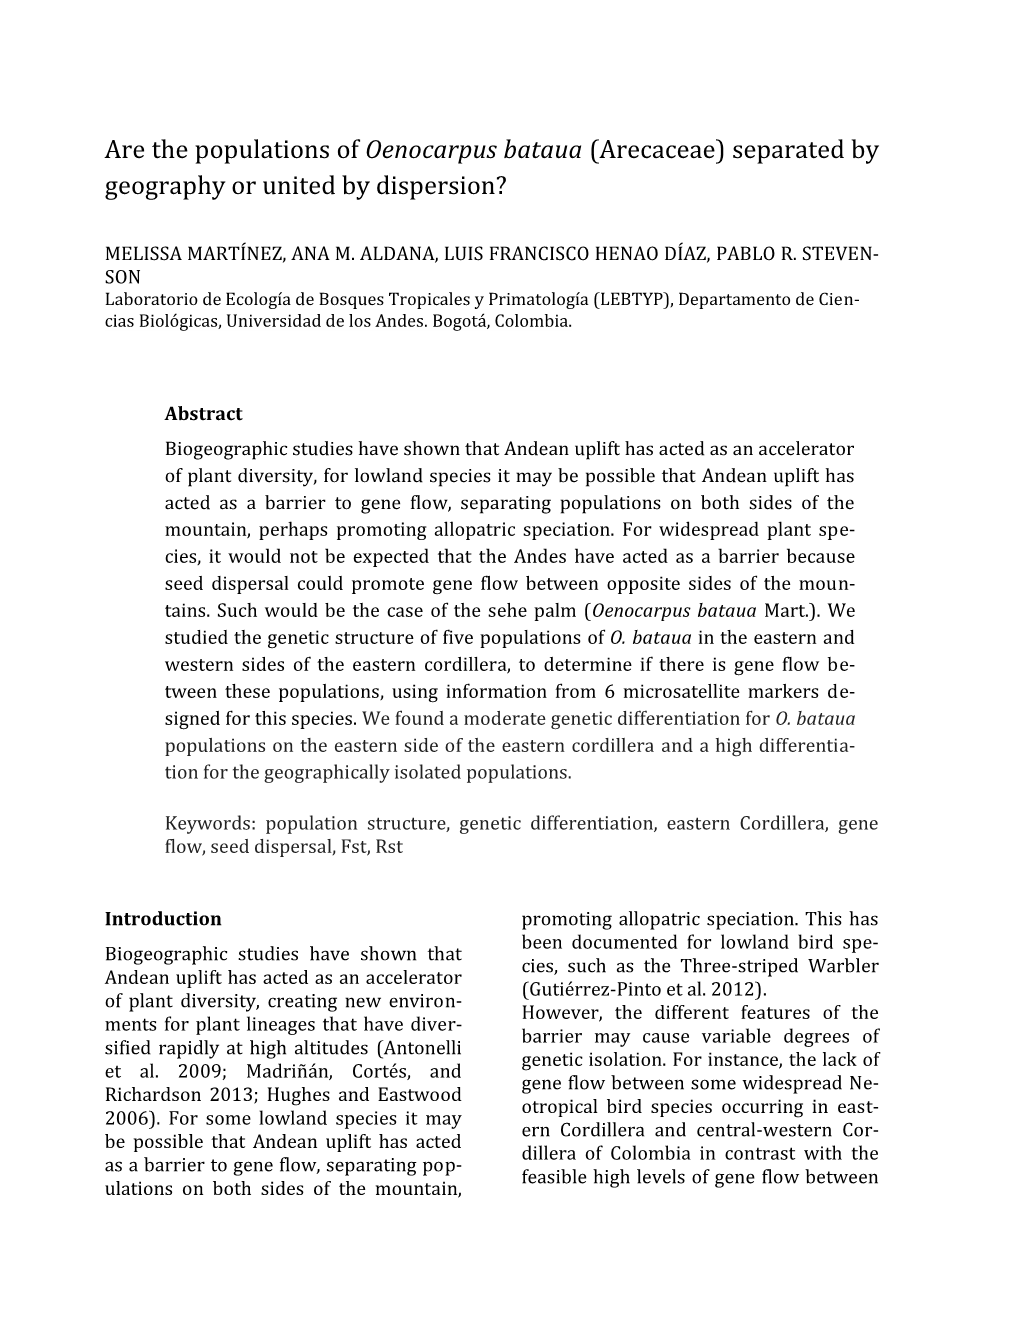 Are the Populations of Oenocarpus Bataua (Arecaceae) Separated by Geography Or United by Dispersion?